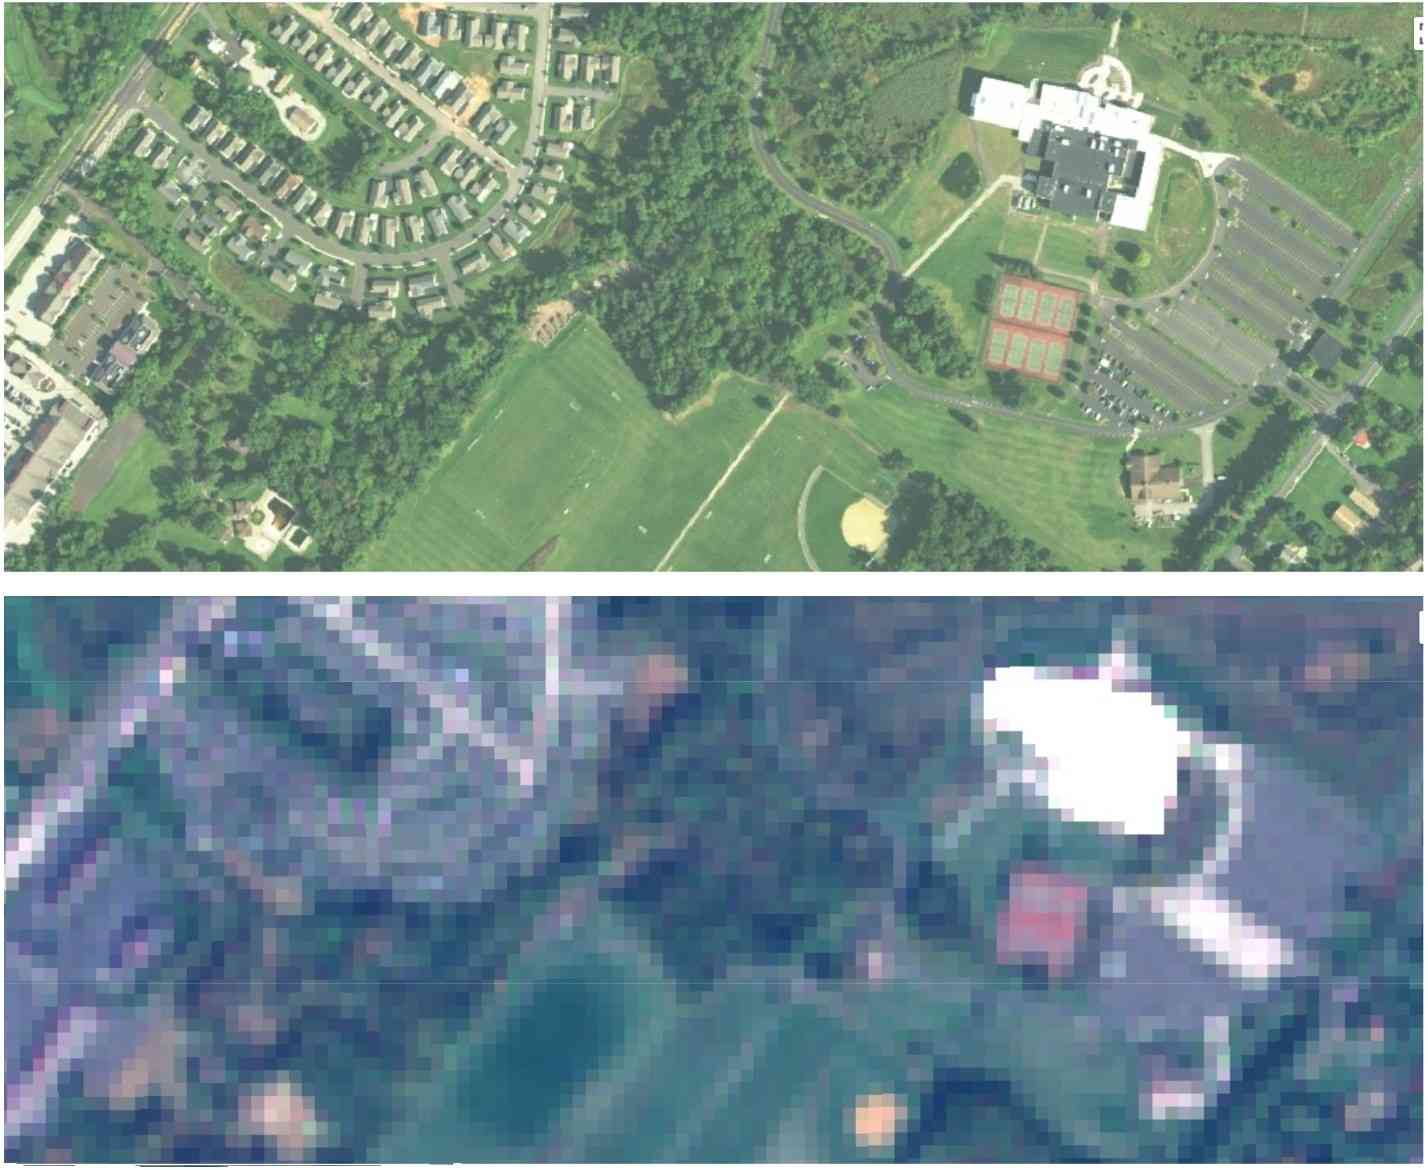 Figure 1 Examples of a 1-m resolution image (above) taken by the National Agricultural Imagery Program, and a 10-m resolution image (below) from the Sentinel-2 satellite system.